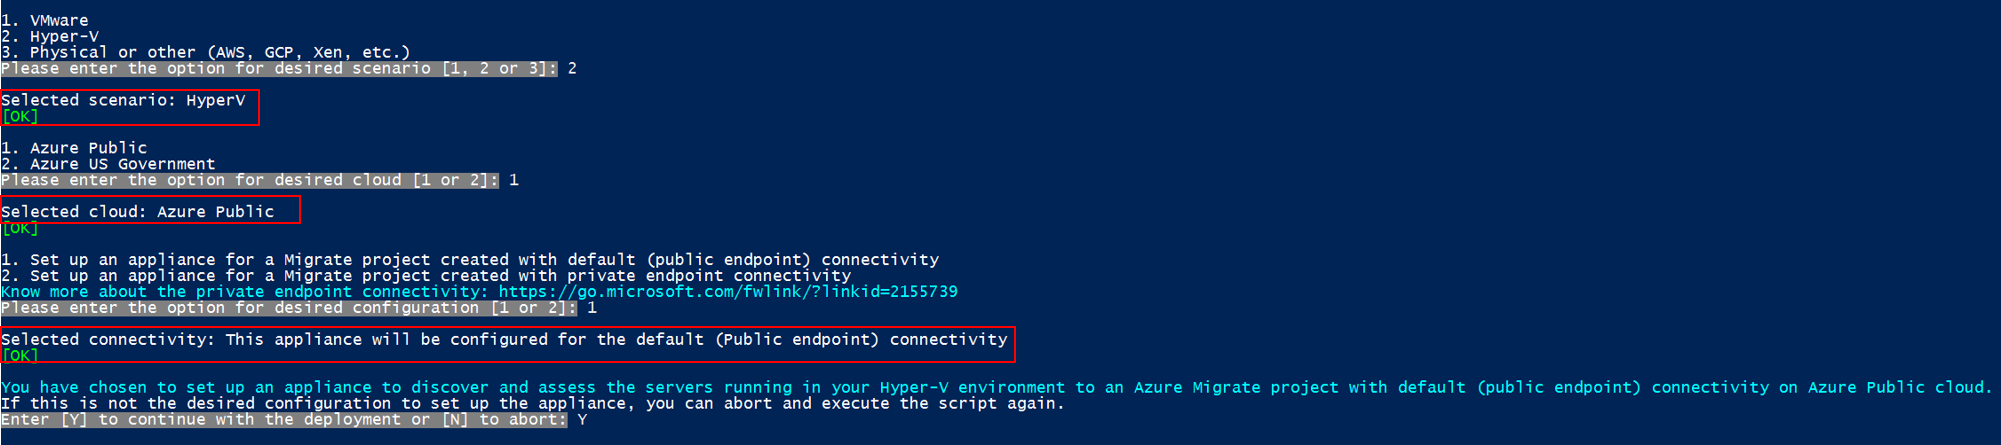 Screenshot that shows how to set up Hyper-V appliance with desired configuration.